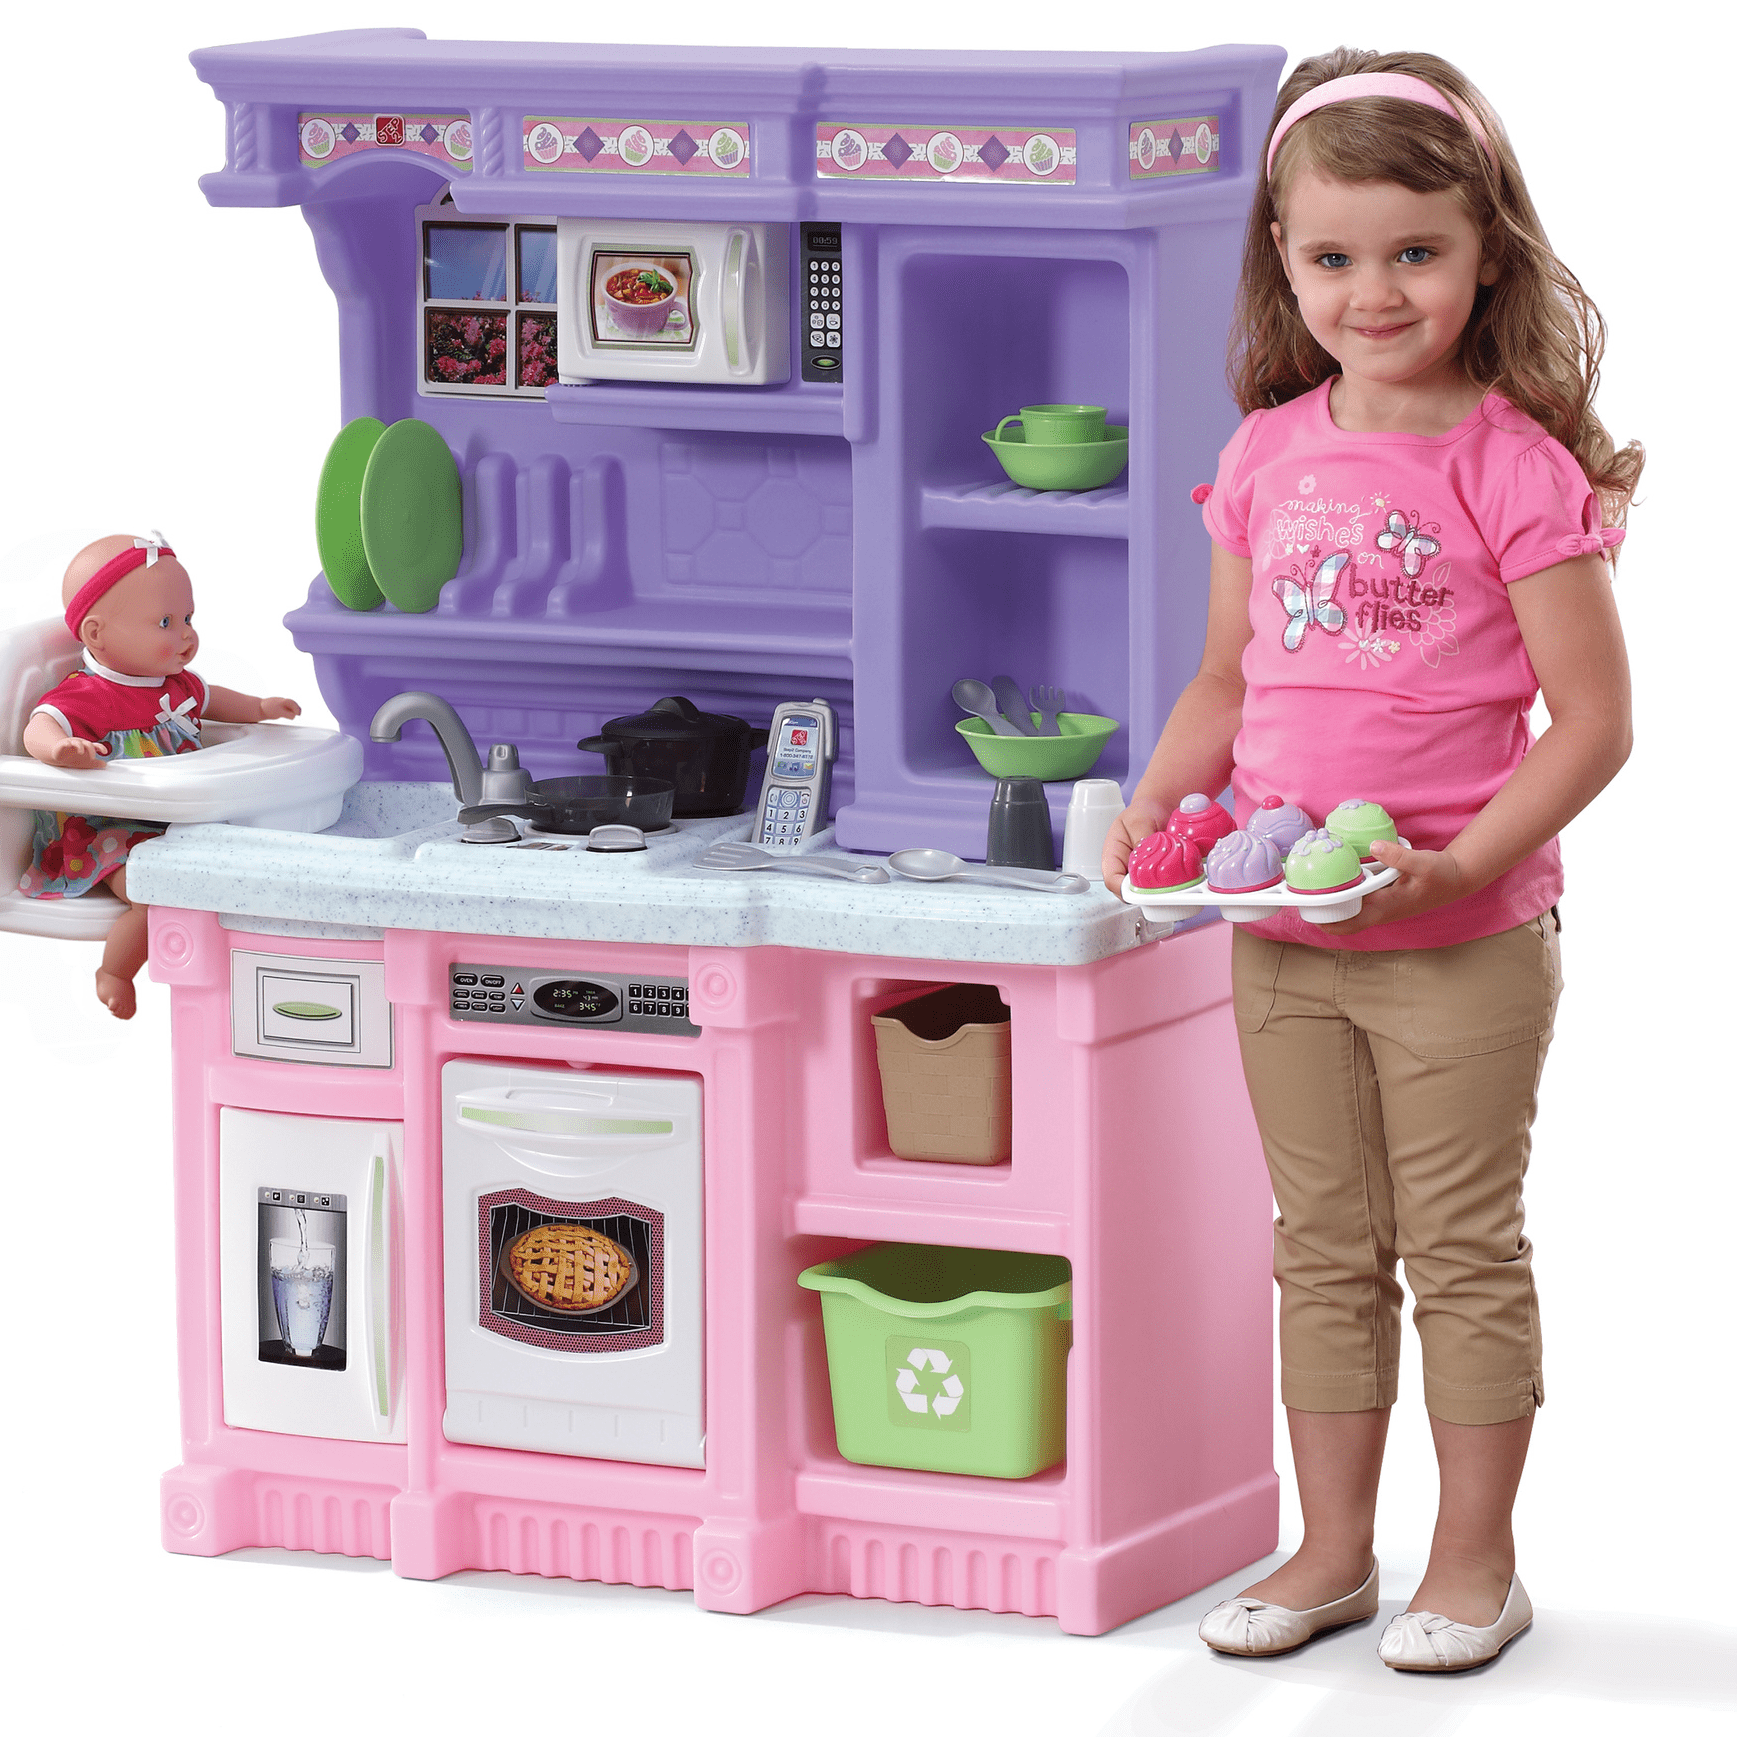 Step2 Little Bakers Pink Kitchen Set for Kid 30pc Accessory Set - 1